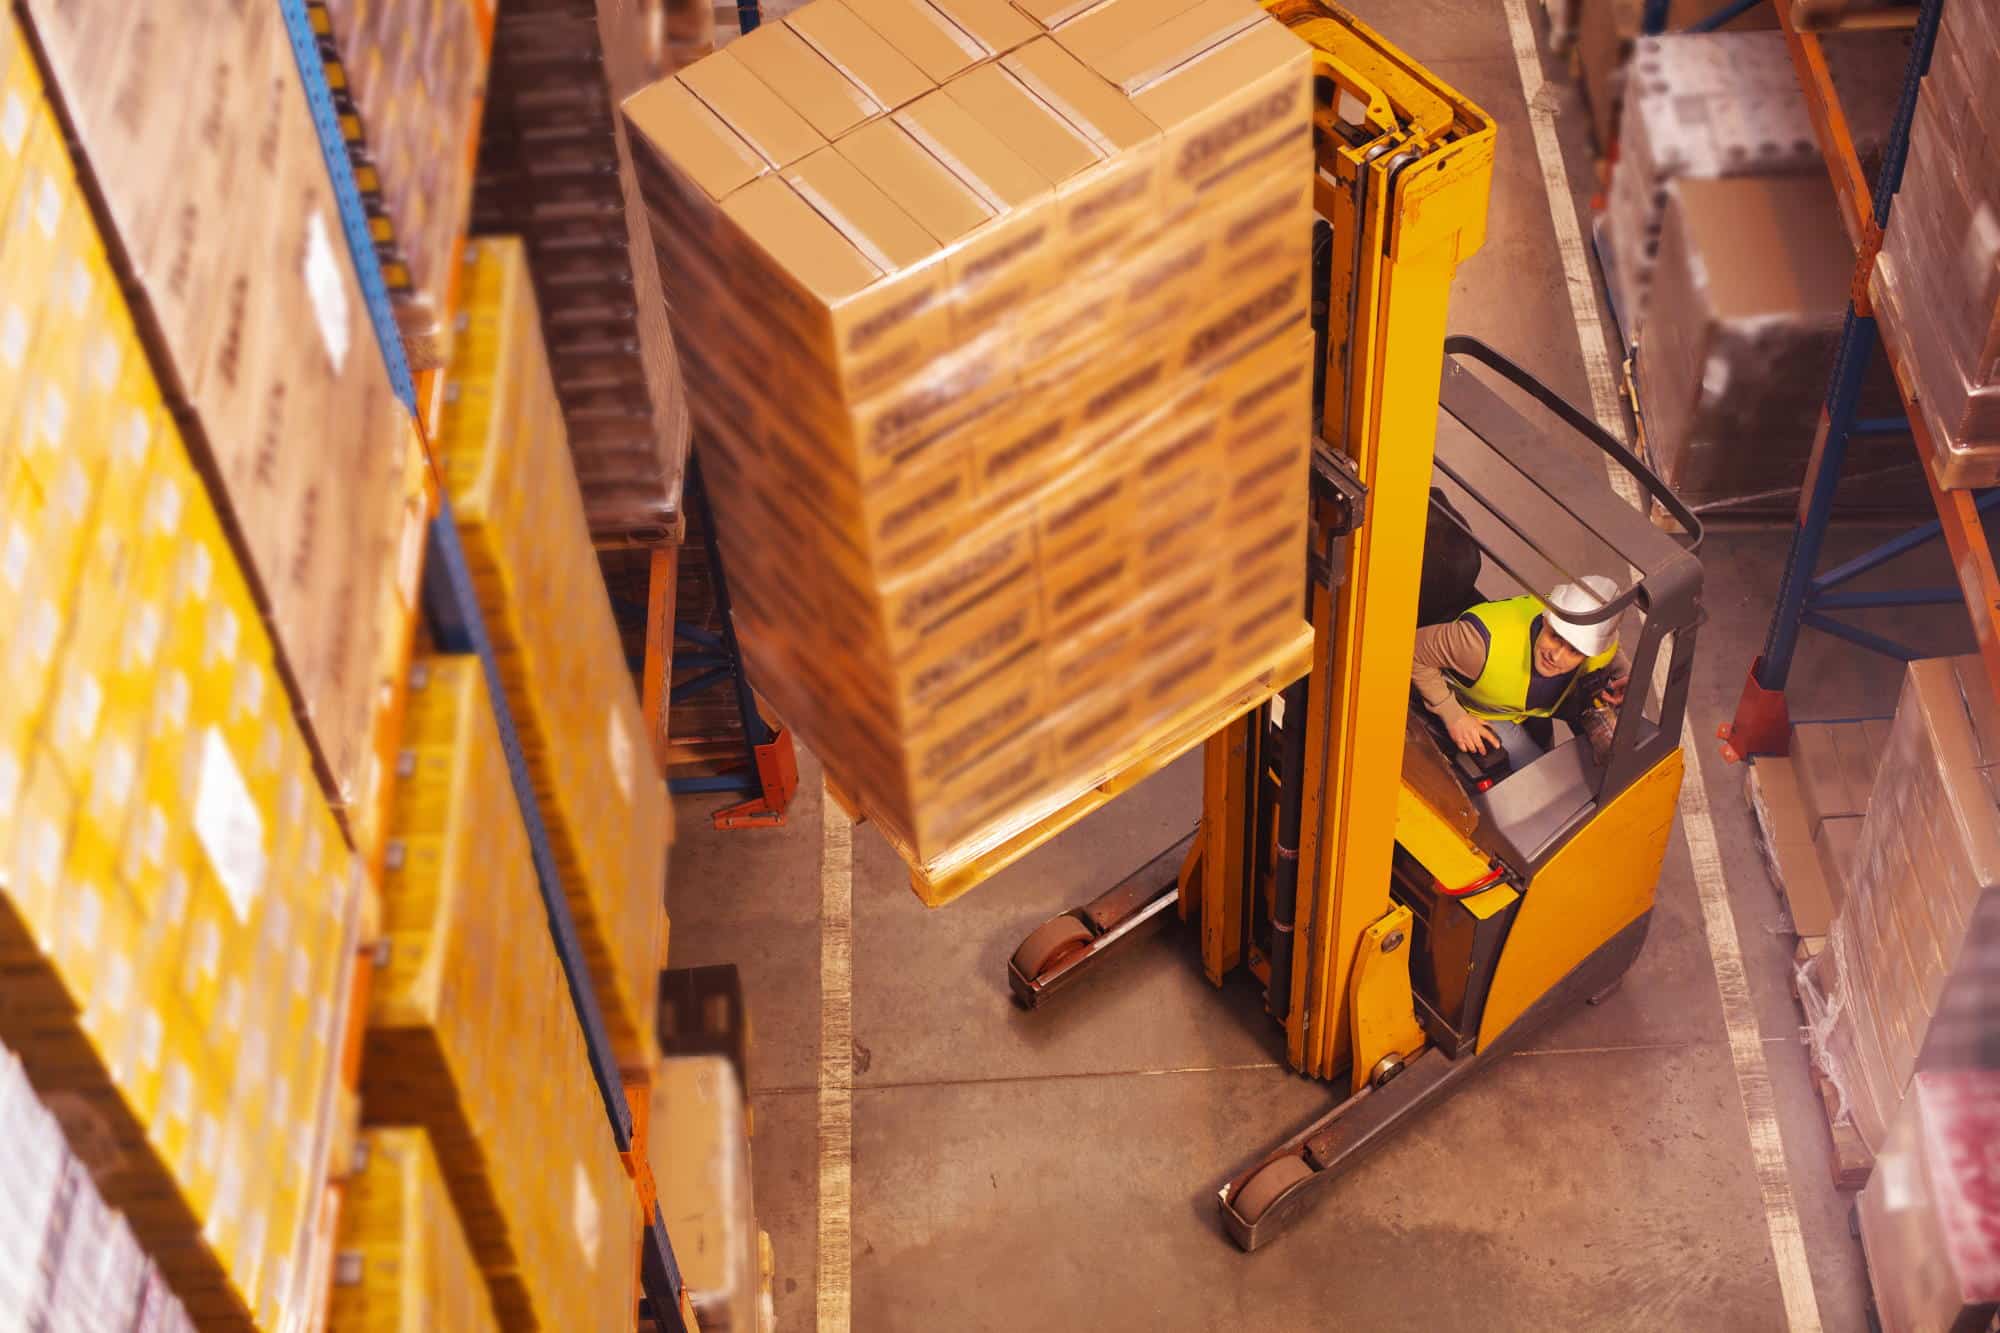 Do you need materials handling equipment for your workplace?